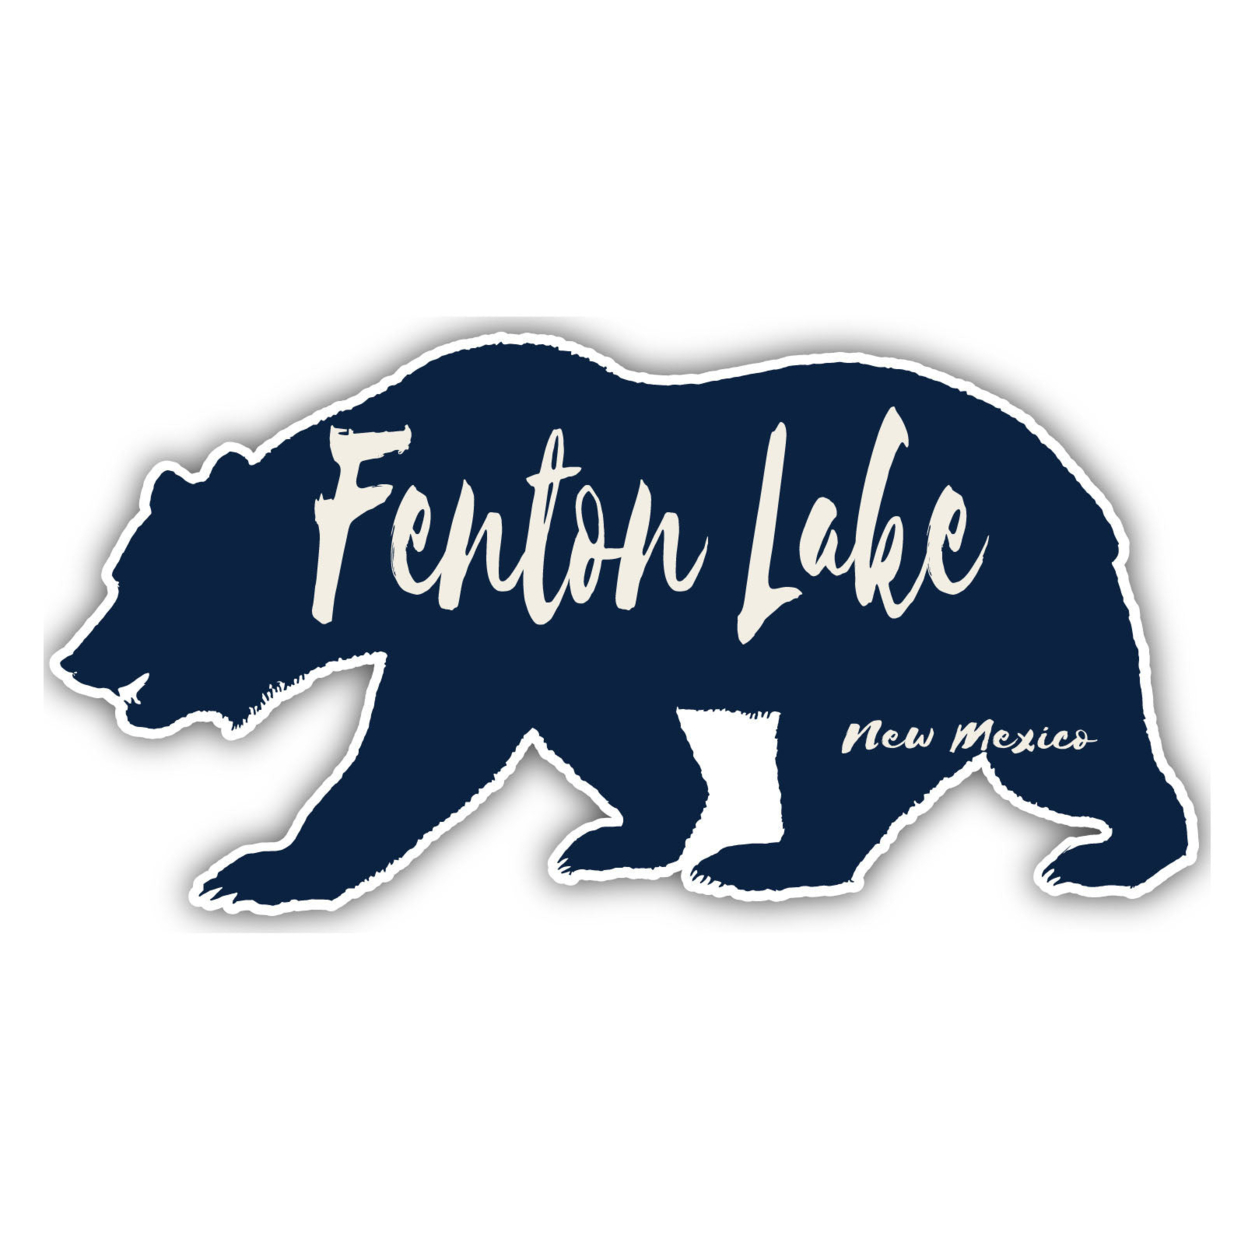 Fenton Lake New Mexico Souvenir Decorative Stickers (Choose Theme And Size) - 4-Pack, 12-Inch, Bear